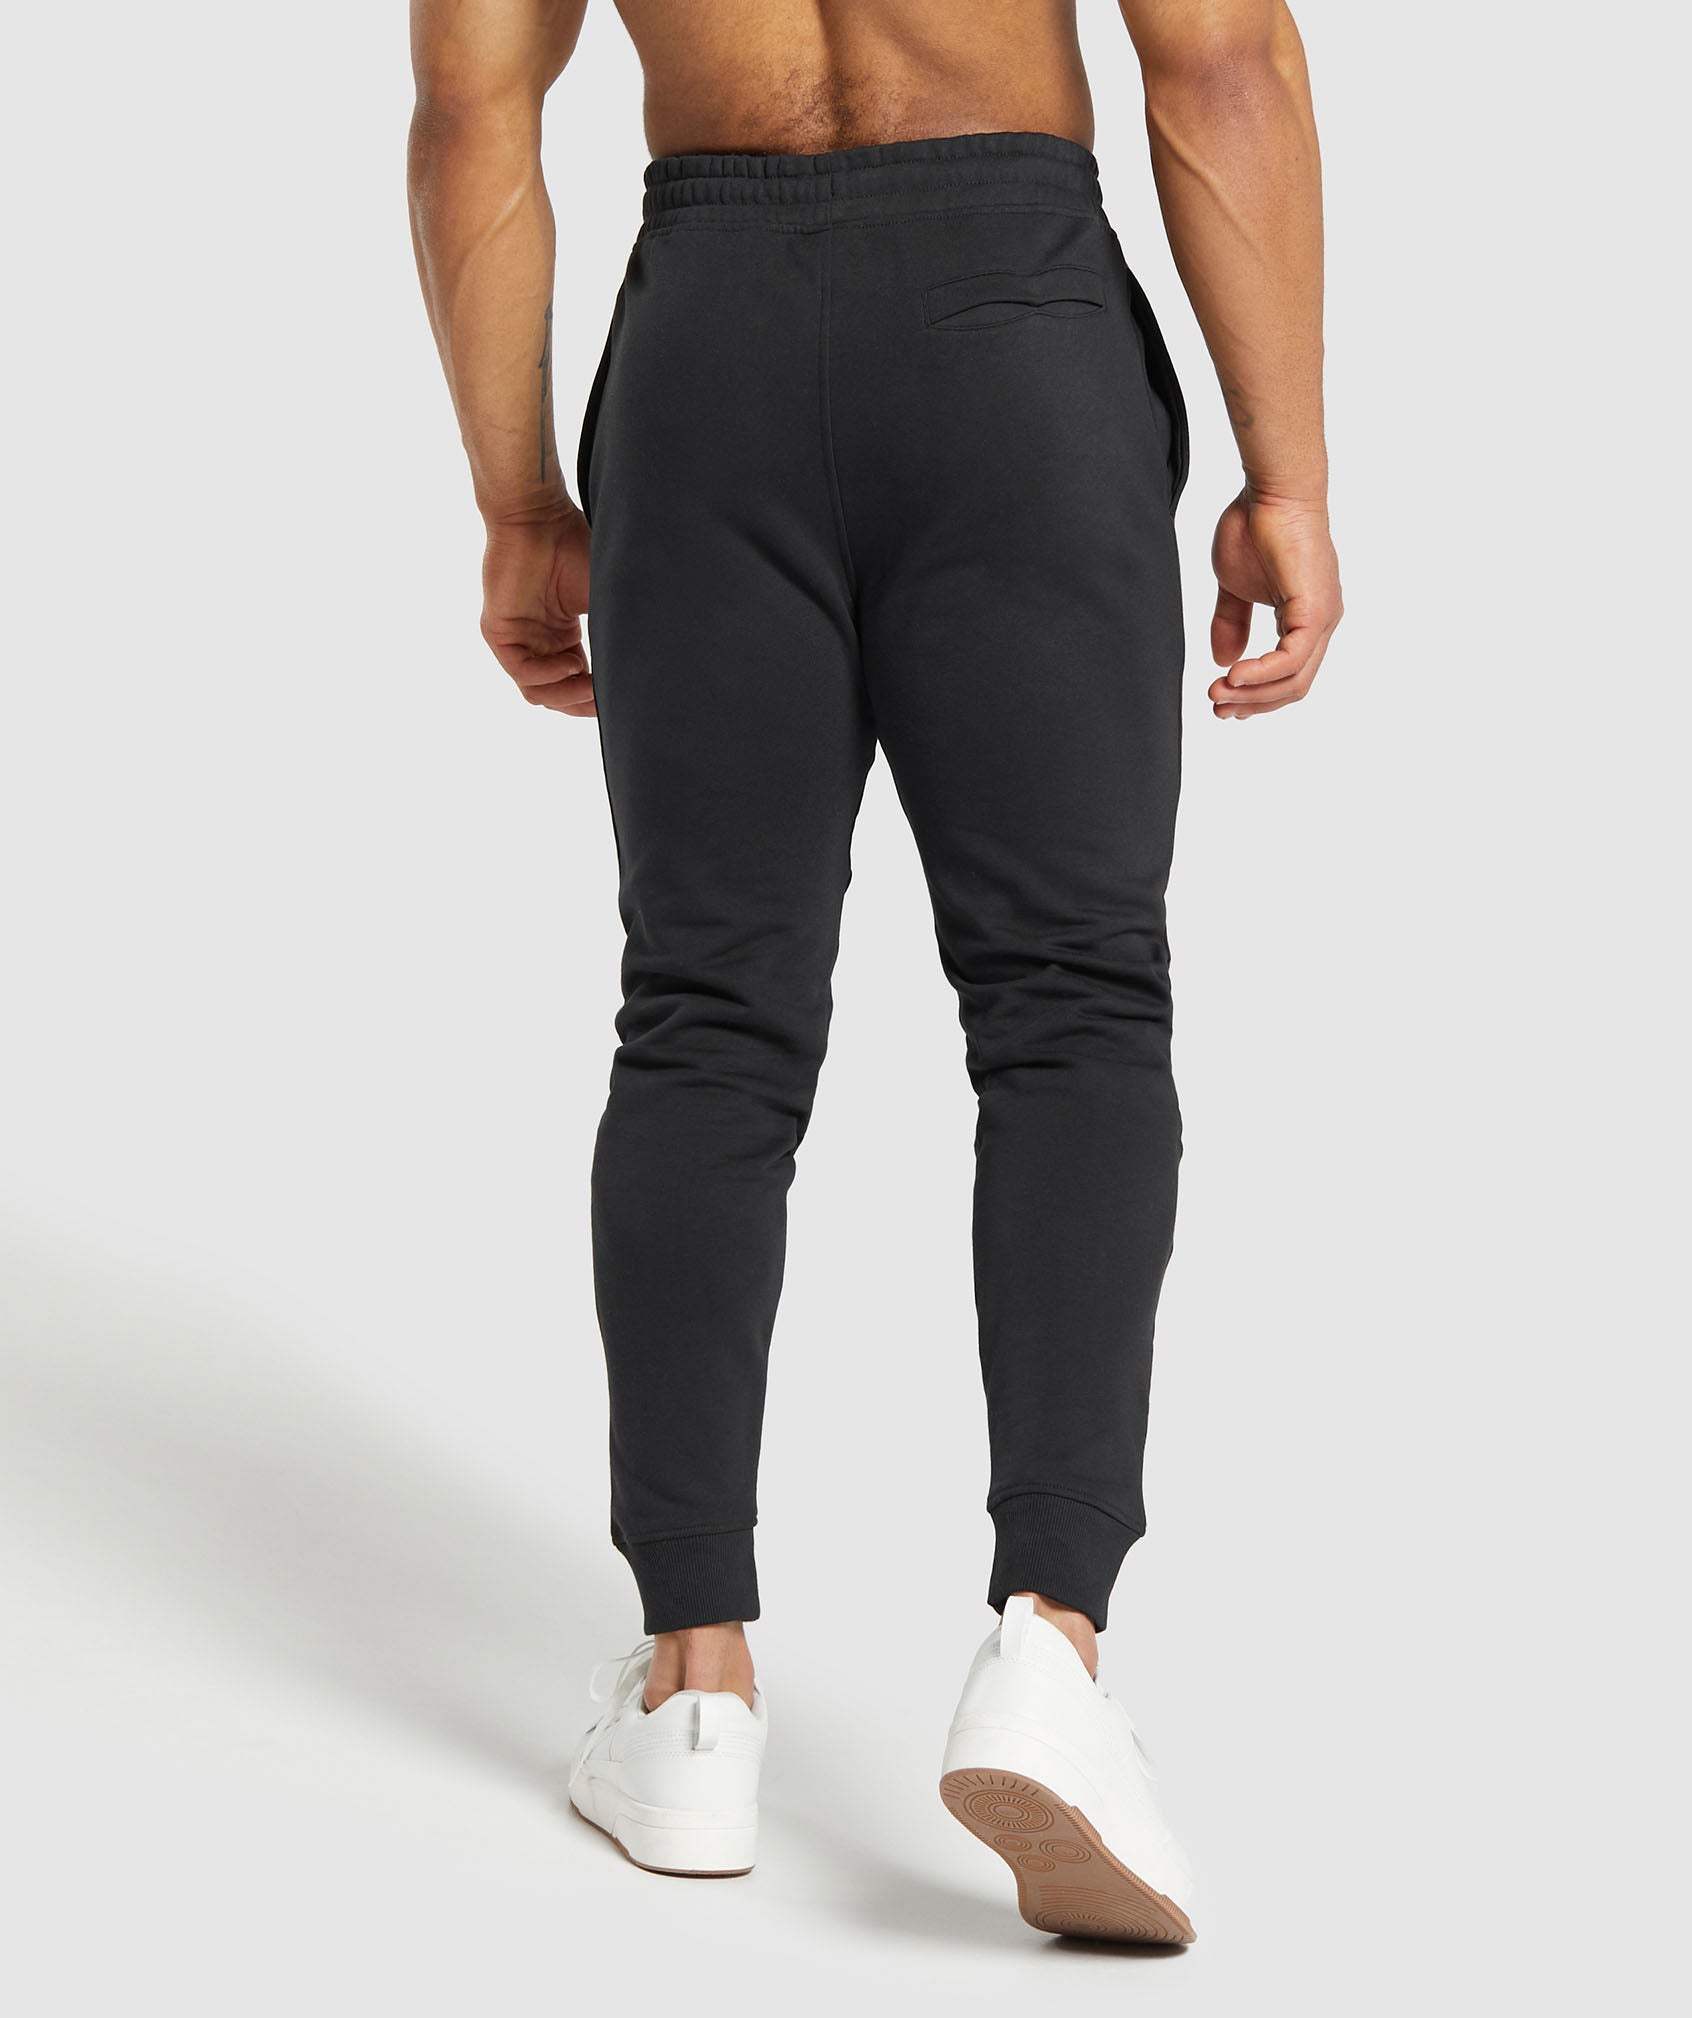 Crest Joggers in Black - view 2